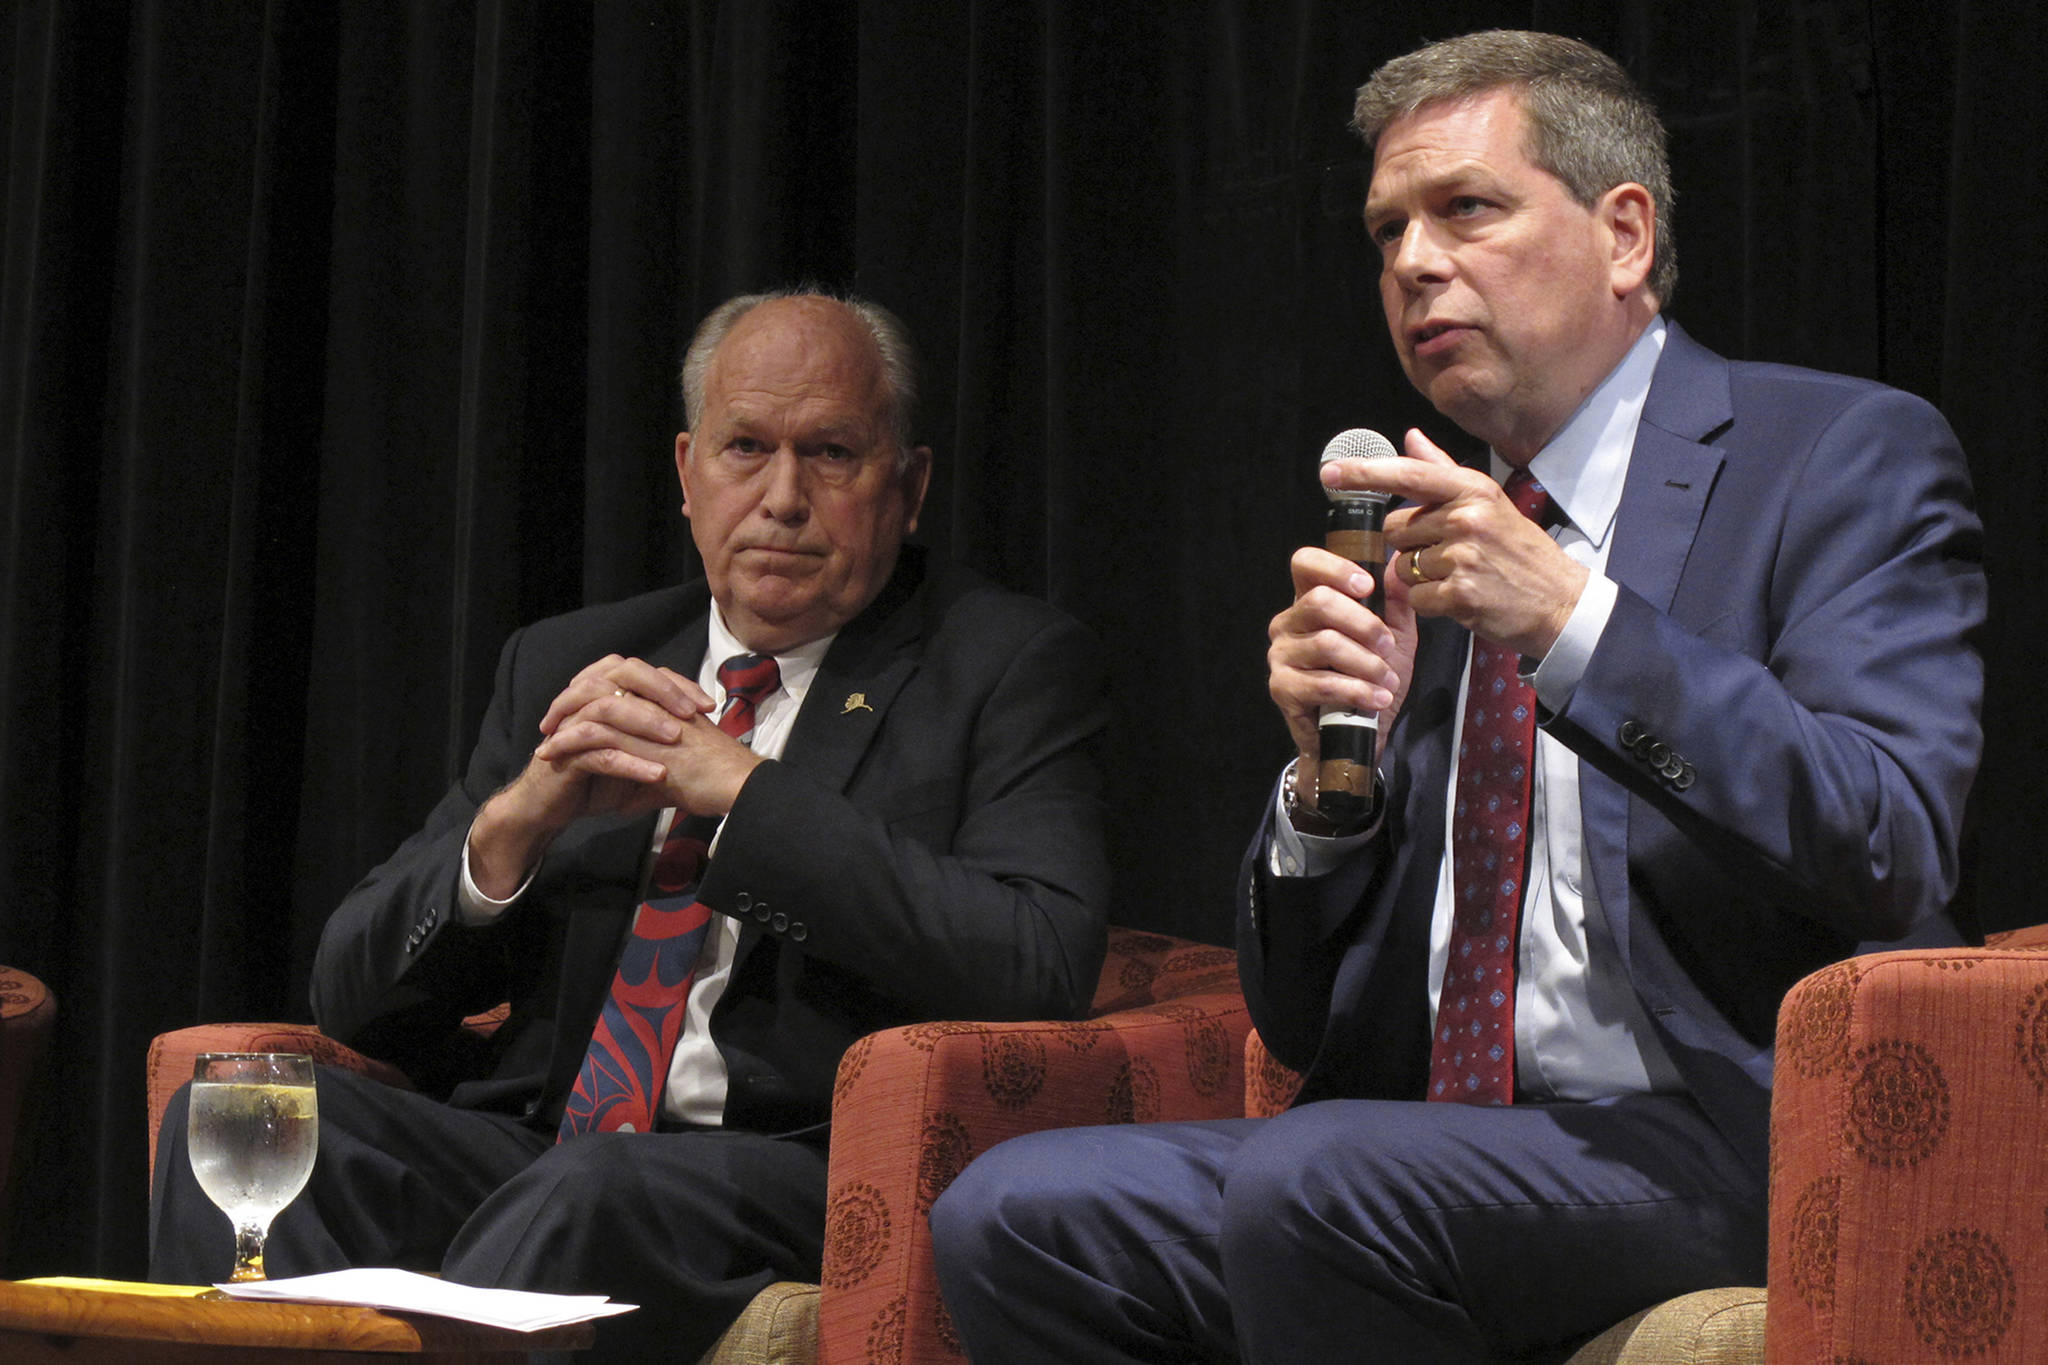 In this Sept. 6 file photo, Democratic nominee for governor of Alaska Mark Begich, right, speaks as Gov. Bill Walker listens during a chamber of commerce gubernatorial candidate forum on Thursday, Sept. 6, 2018, in Juneau, Alaska, On Friday, Oct. 19, Walker announced he was dropping his bid for re-election, though his name remains on the ballot. He threw his support behind Begich, who will face Republican Mike Dunleavy in November. (AP Photo/Becky Bohrer, File)